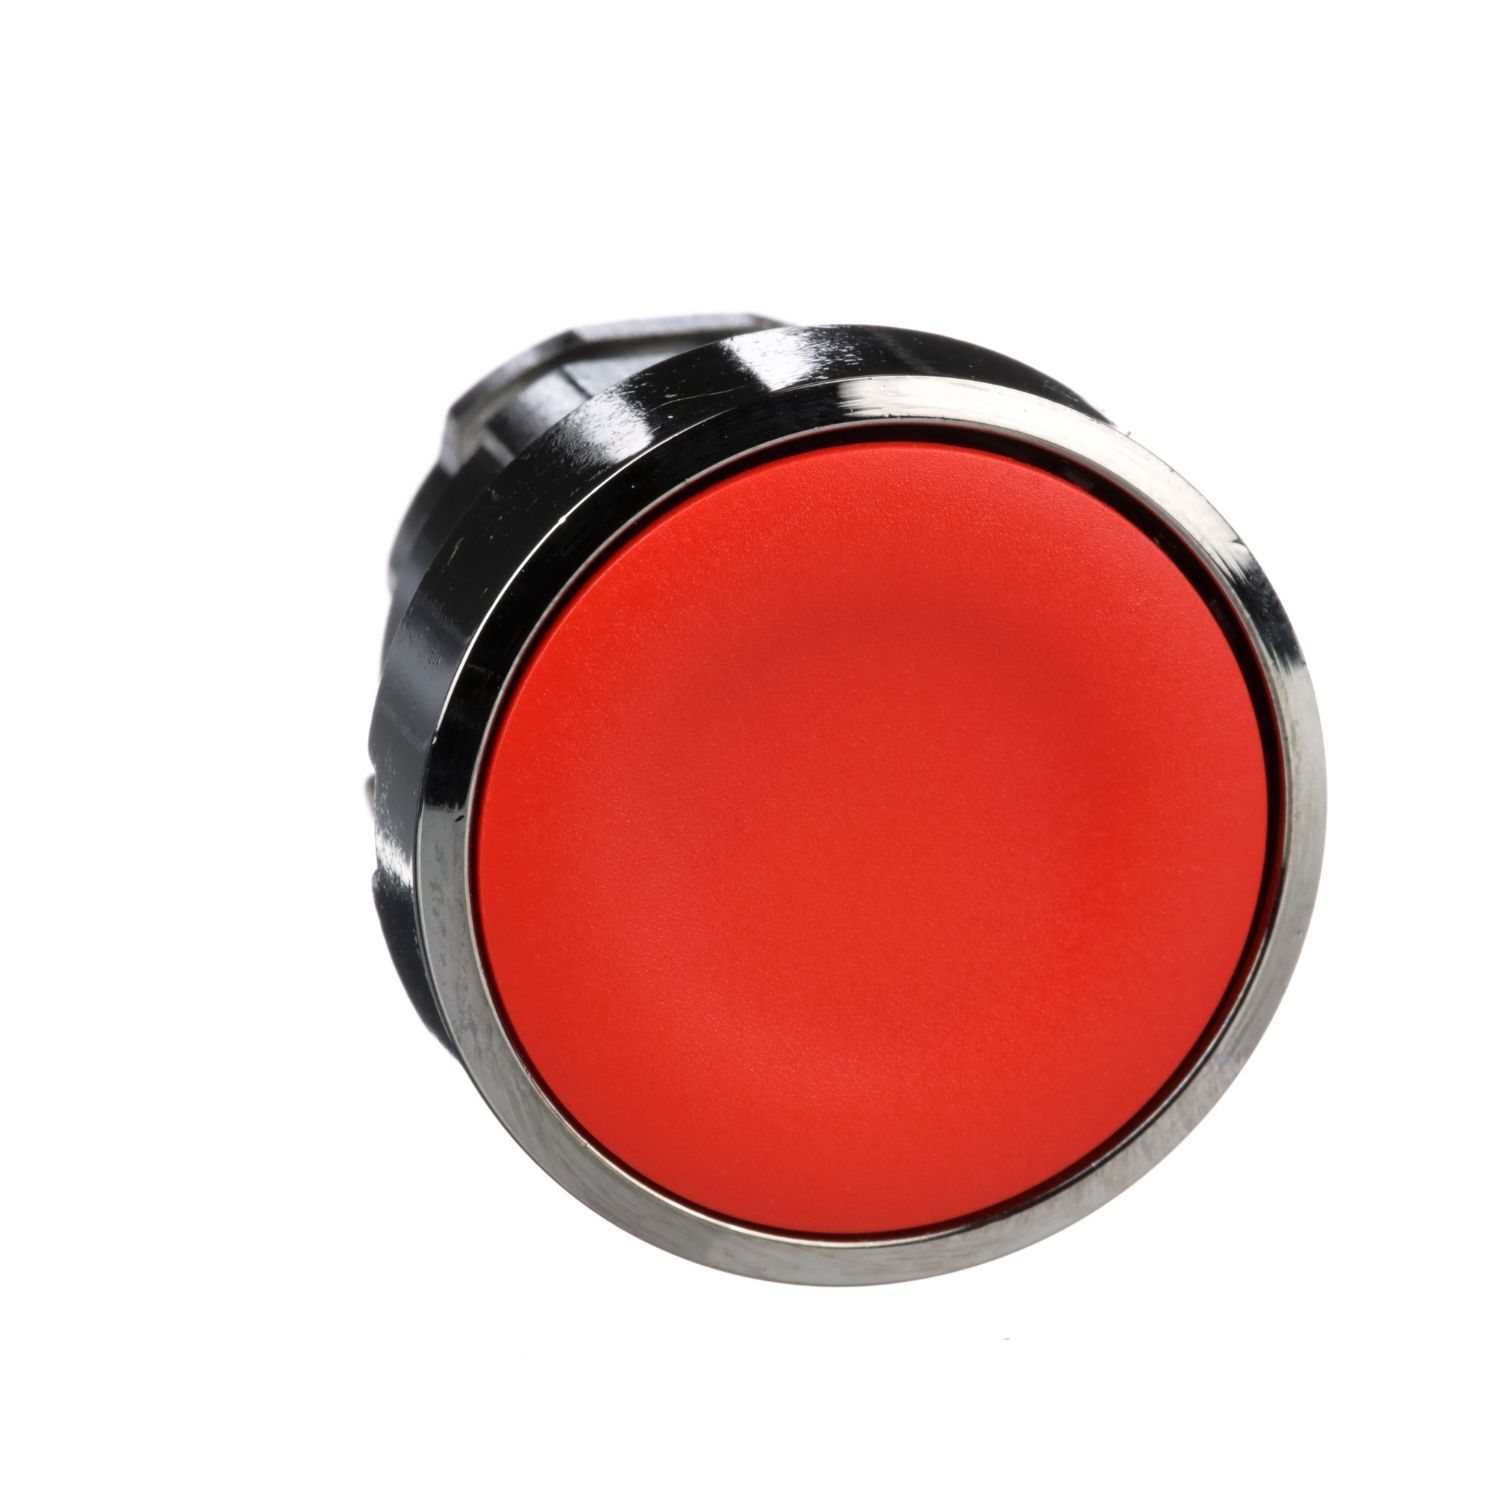 ZB4BA4 Head for non illuminated push button, Harmony XB4, metal, flush, red, 22mm, spring return, unmarked